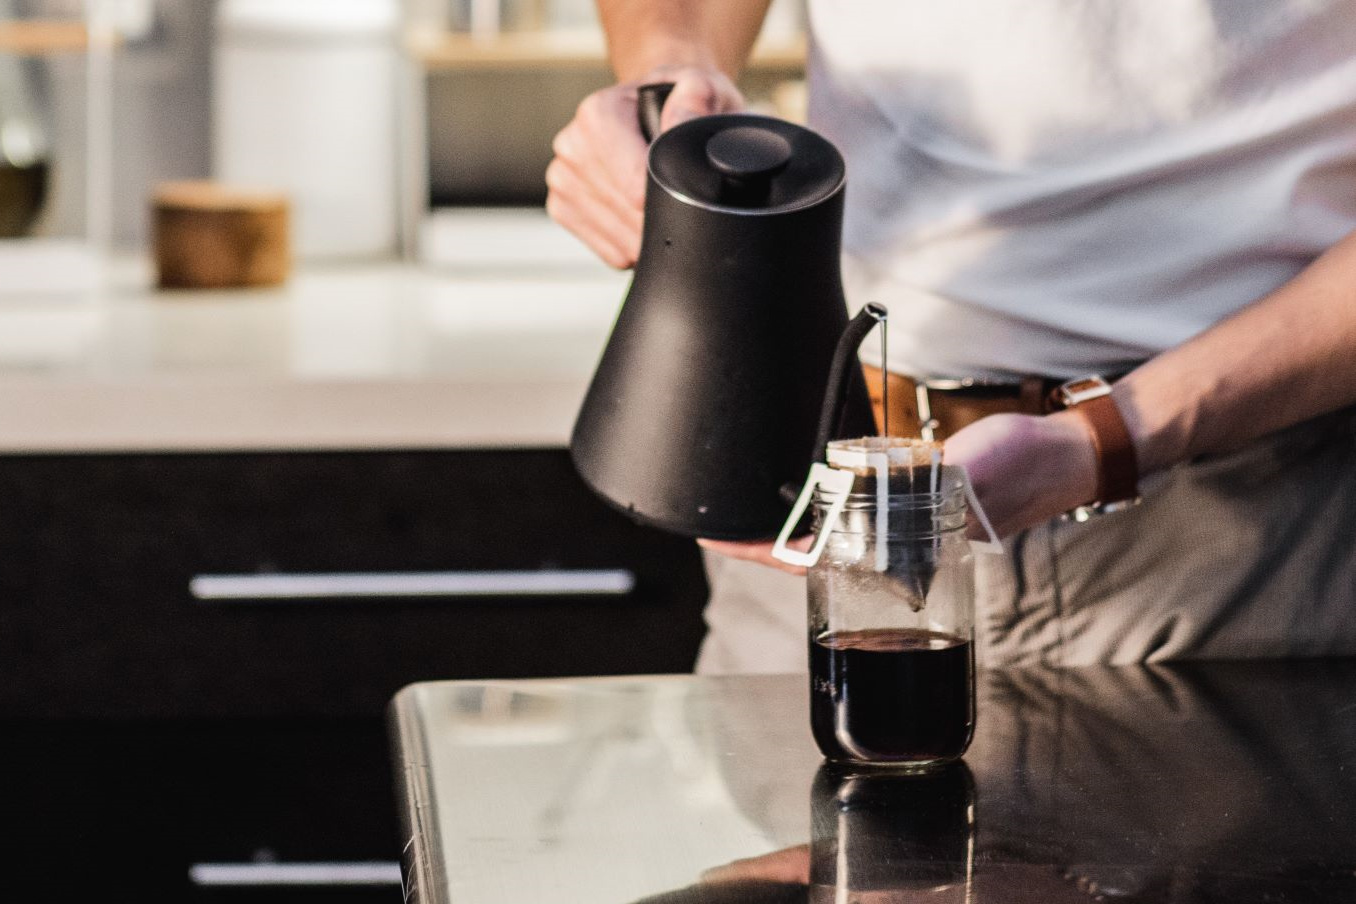 Male making coffee before work using single-serve pour over coffee pouches